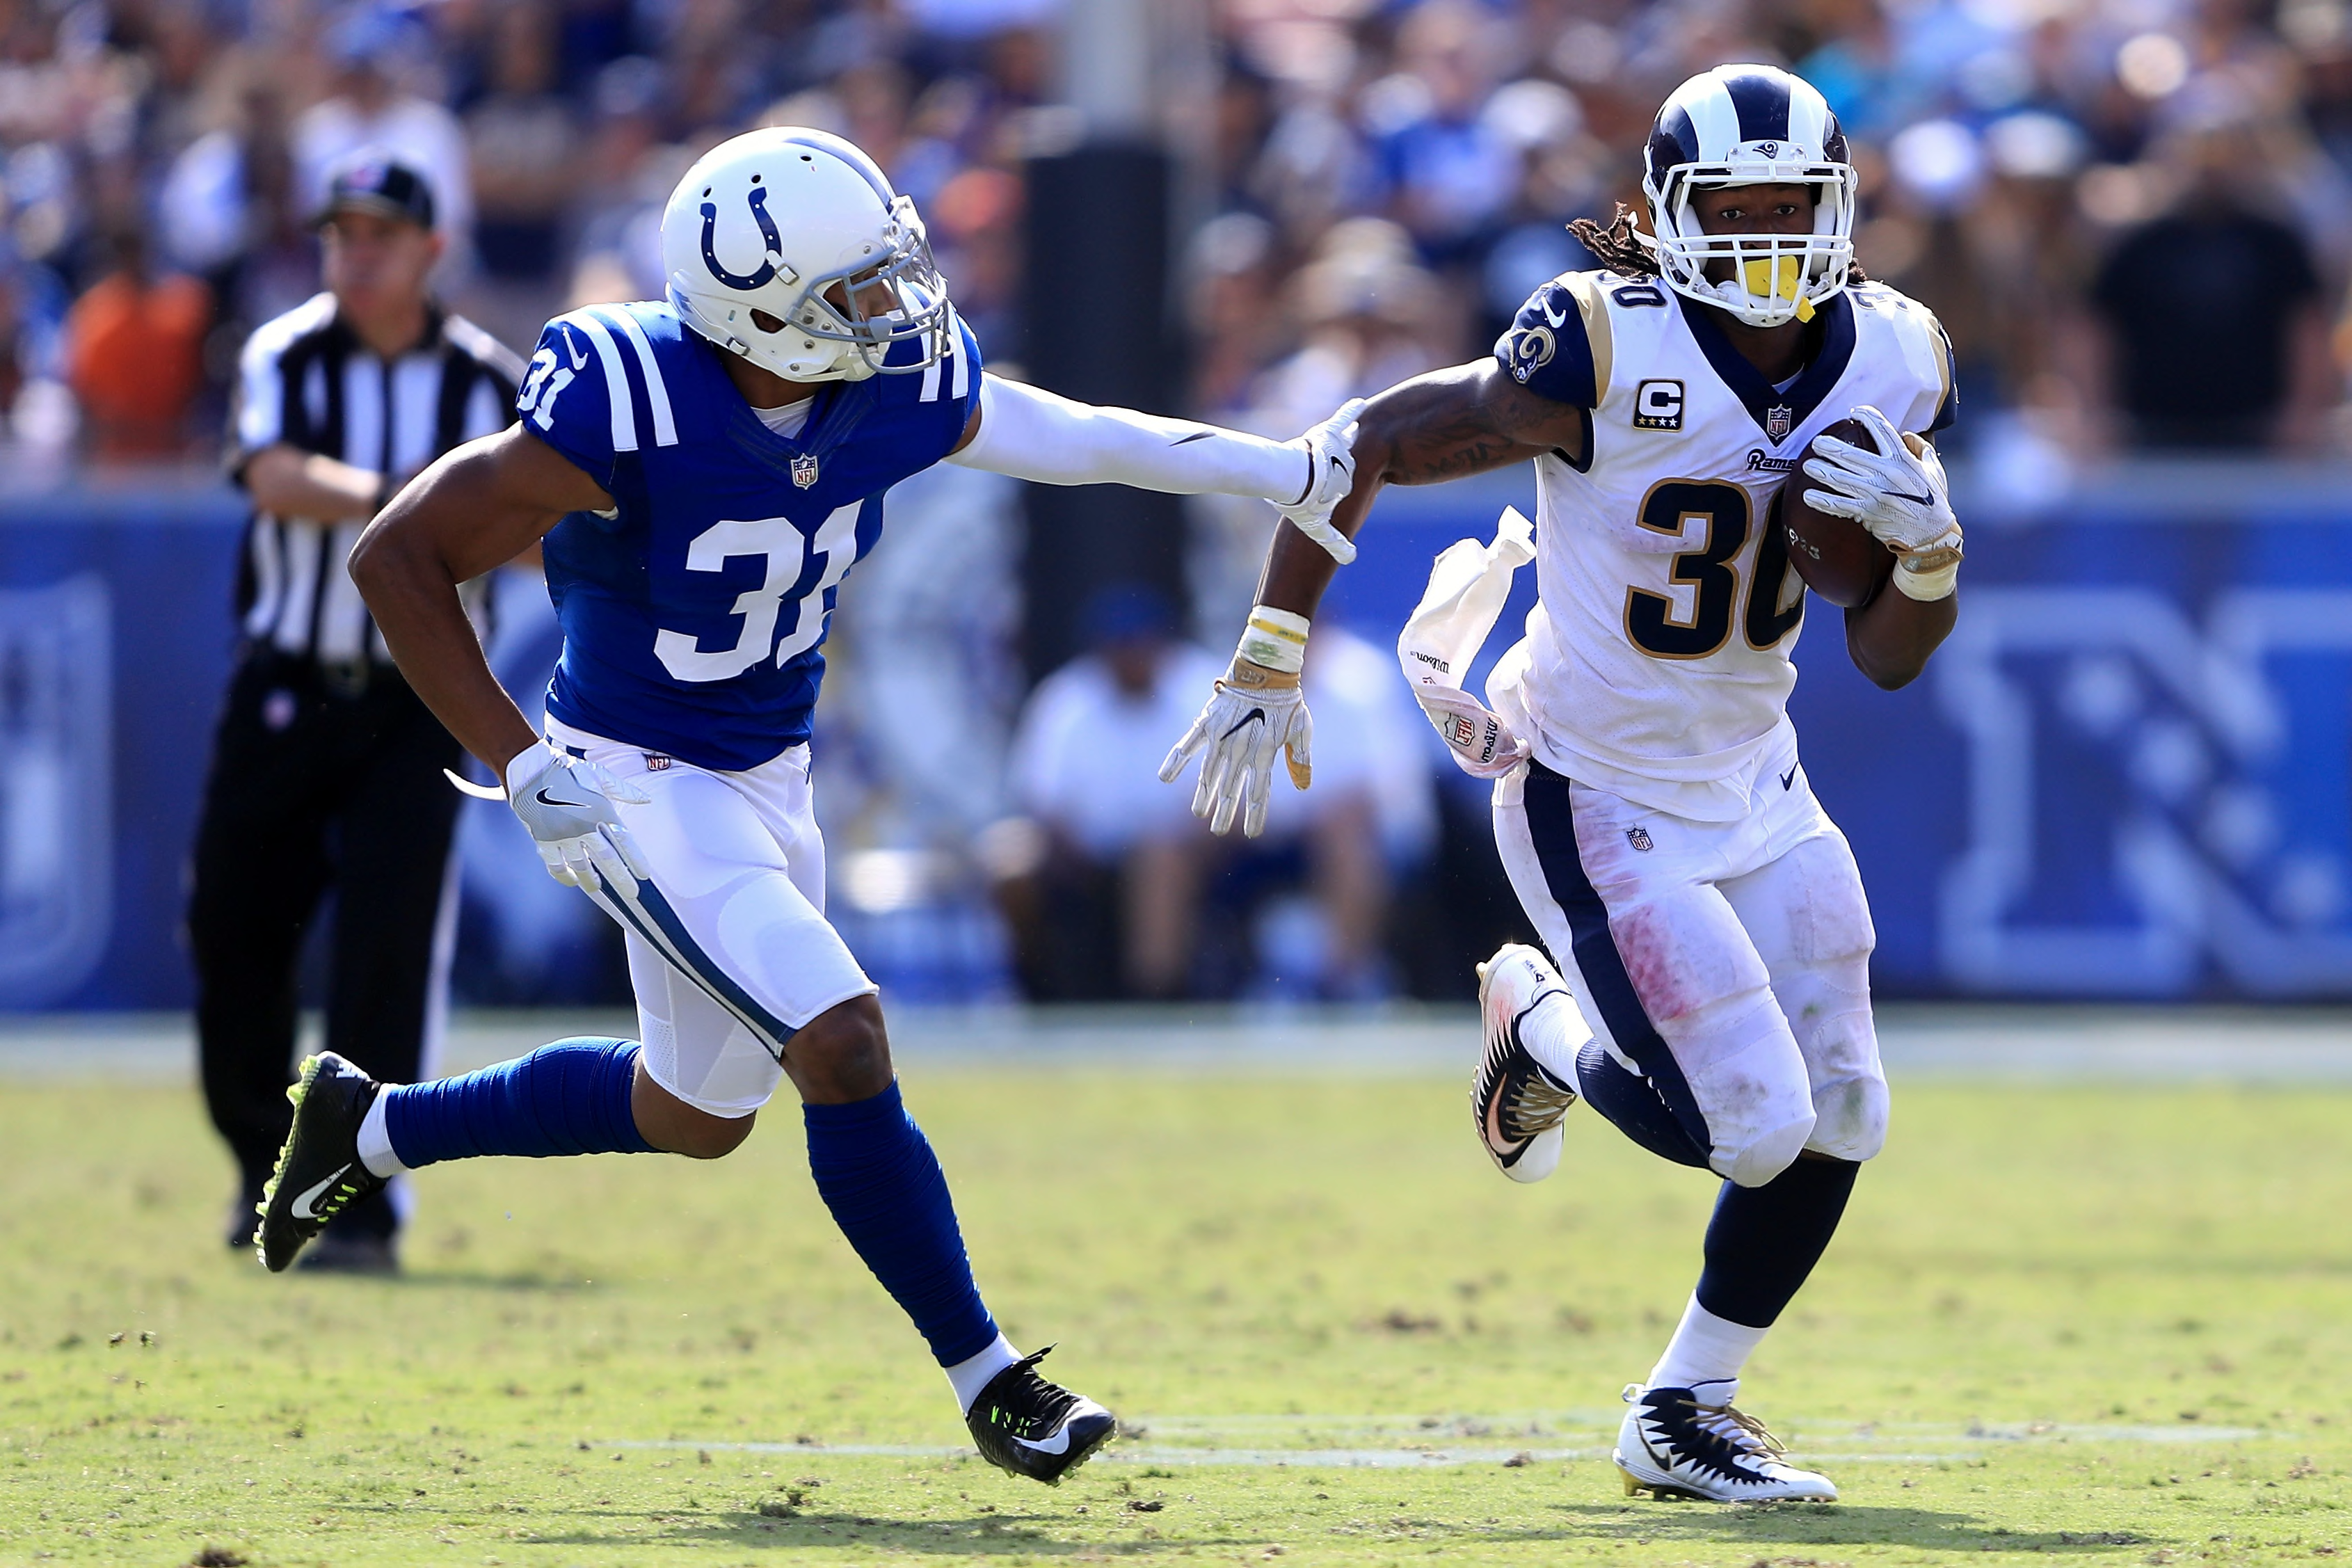 Los Angeles Rams Three takeaways from home opener vs Colts